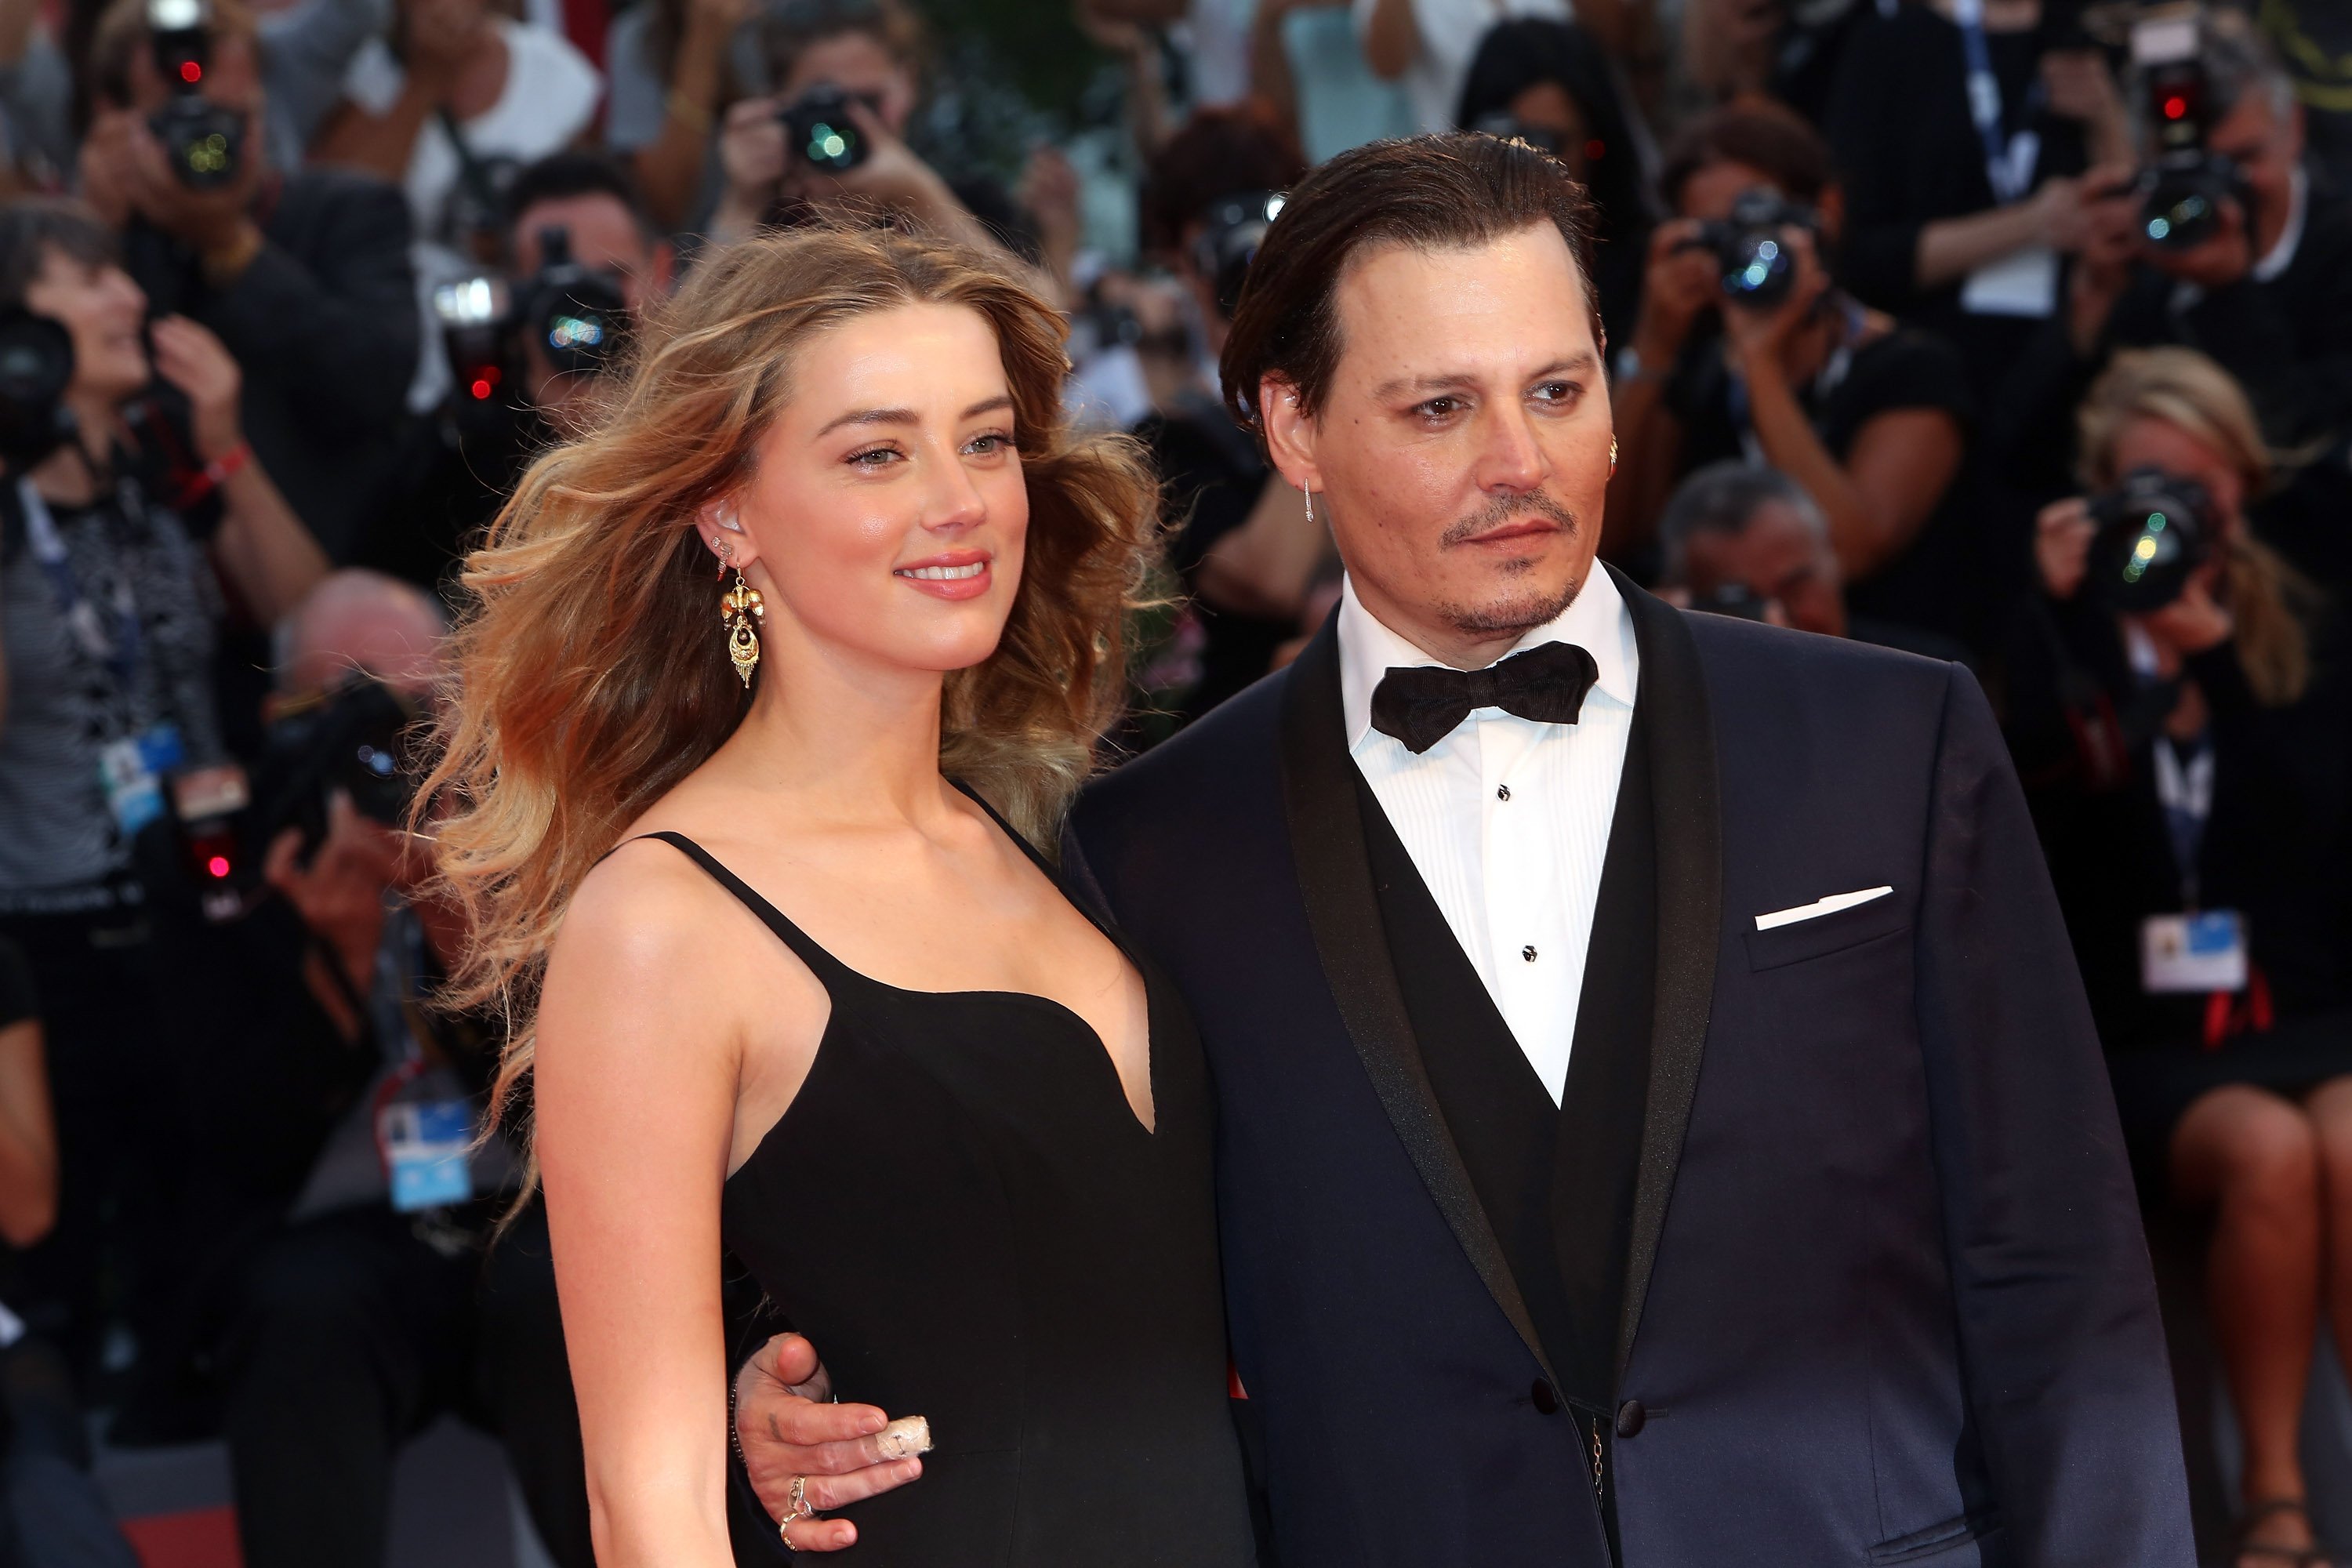 Johnny Depp and Amber Heard attend a premiere for 'Black Mass' during the 72nd Venice Film Festival on September 4, 2015 in Venice, Italy. | Source: Getty Images